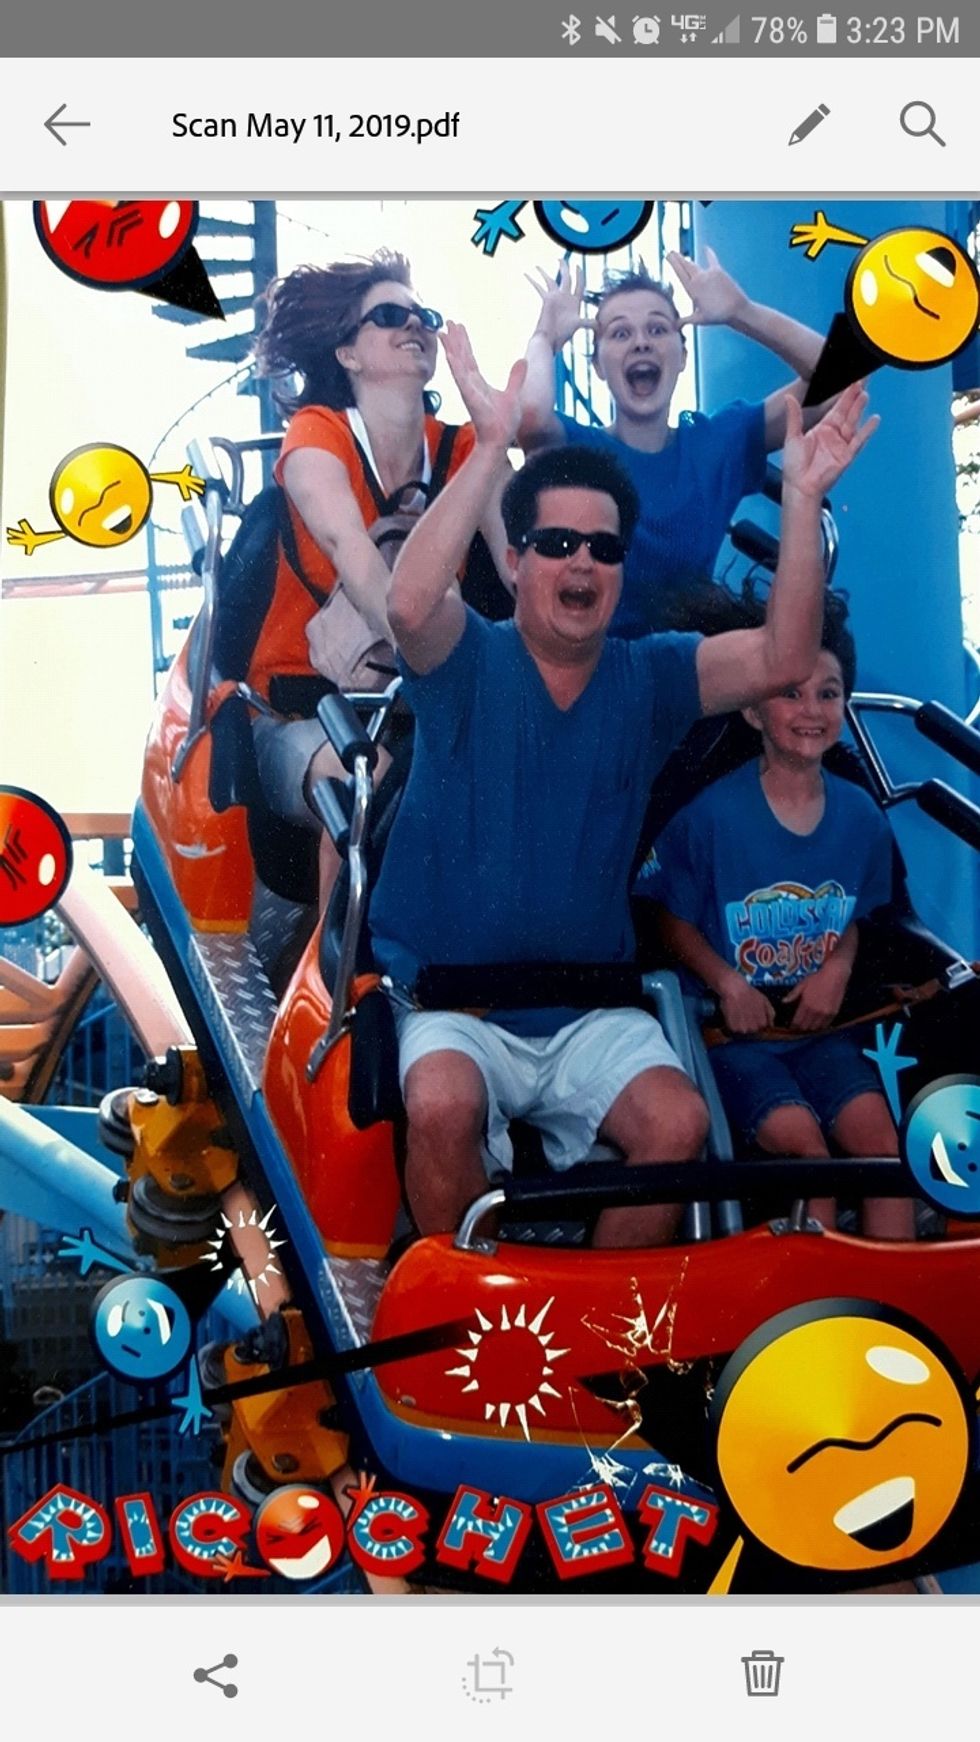 It's All Downhill When You Grow Up In A 'Coaster Family'